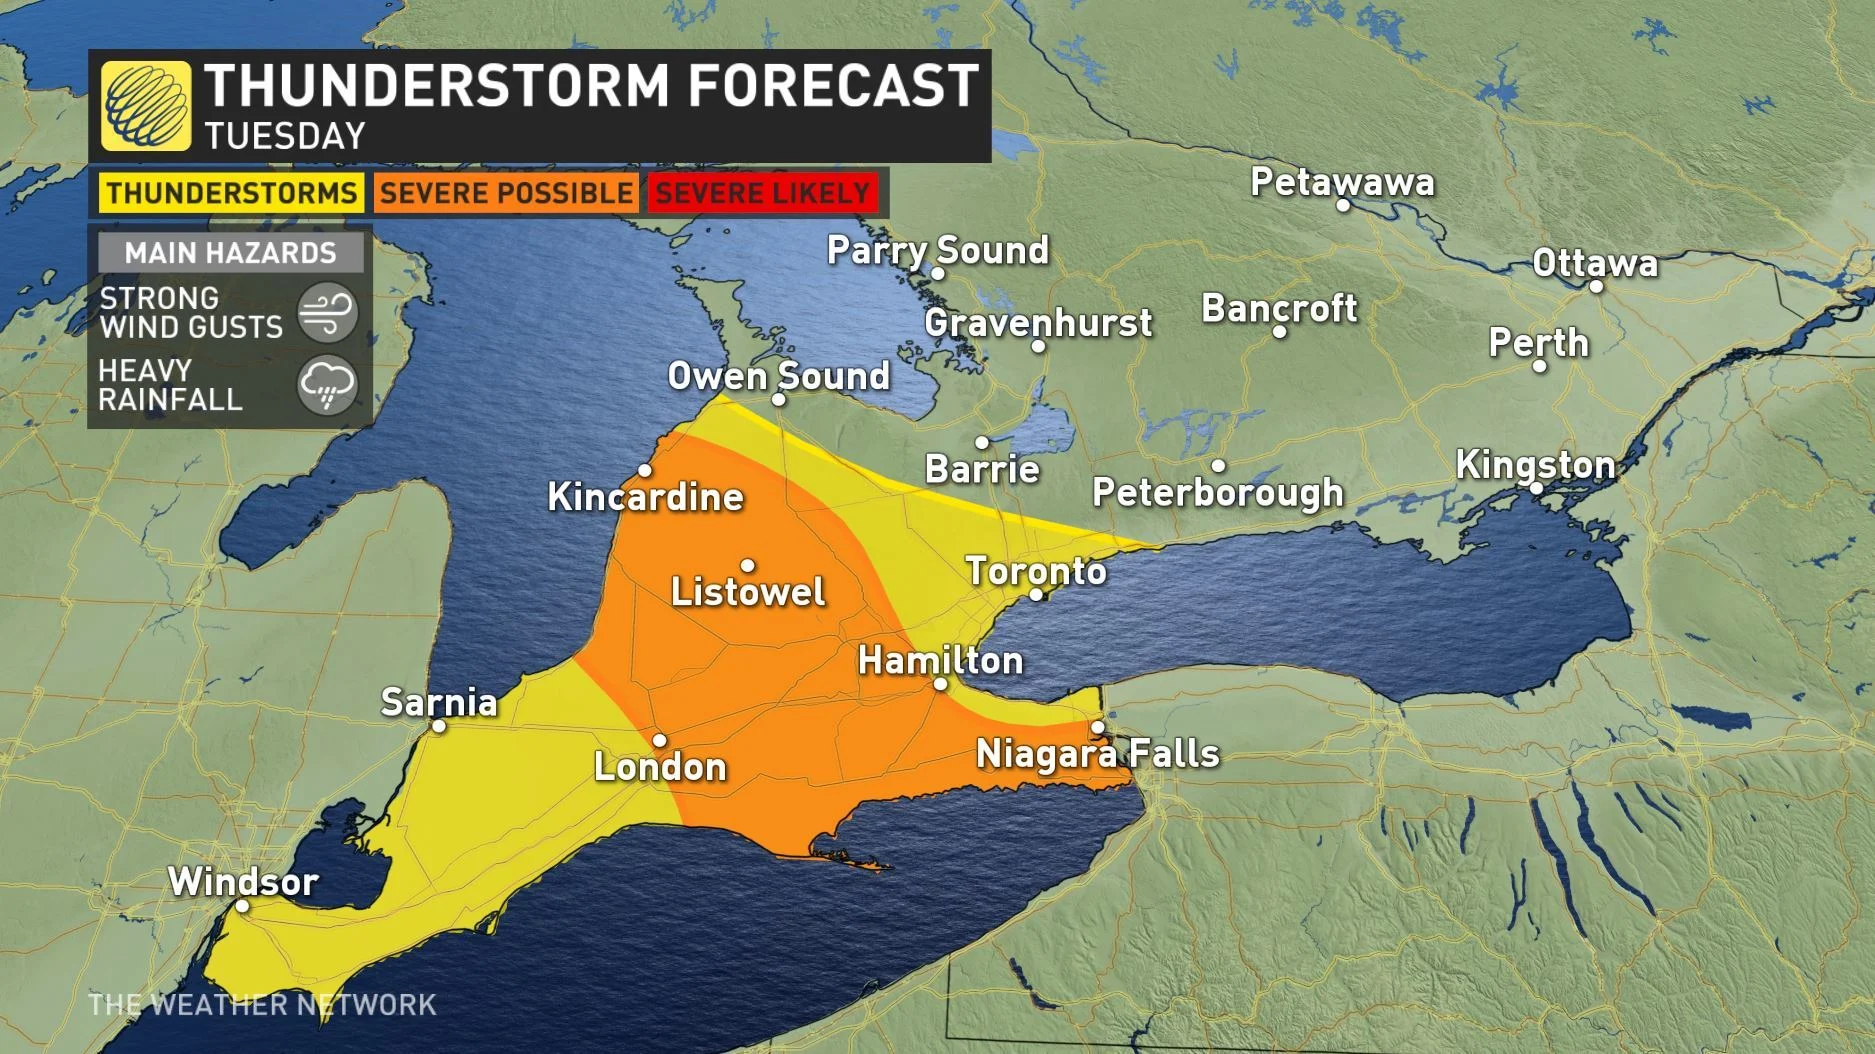 Ontario: Chance of severe thunderstorms, scattered showers